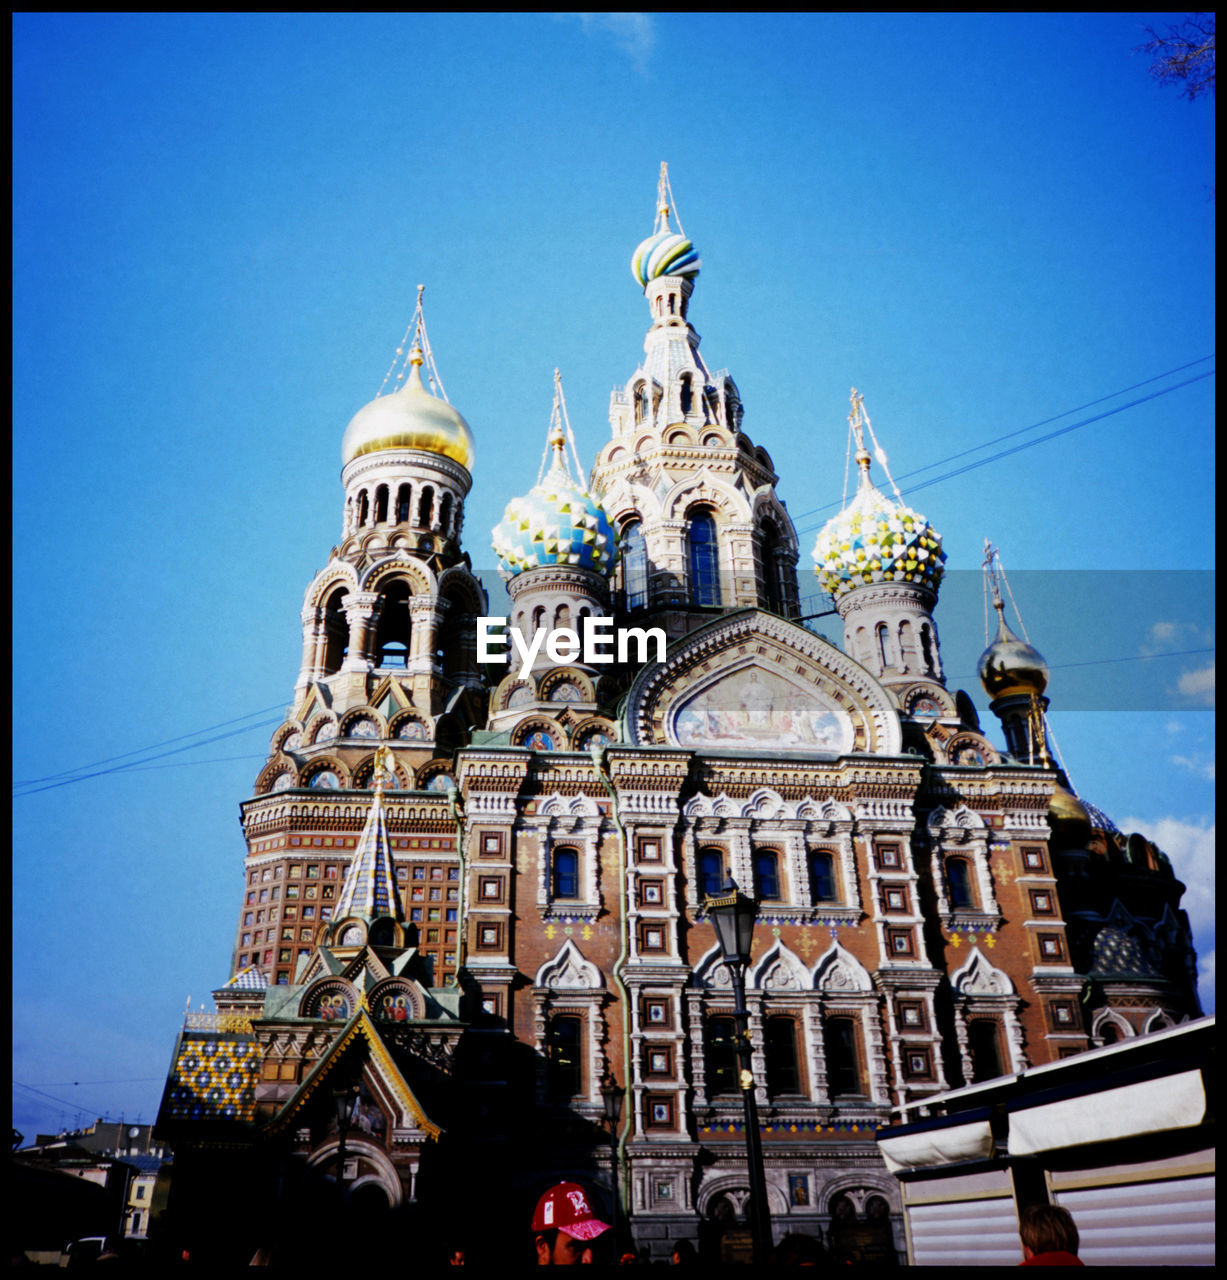 Saviour on the spilled blood Analogue Photography Architecture Belief Cathedral Christian Church Czar Historic Lomography Medium Format Newa Onion Dome Orthodox Orthodox Church Orthodoxy Outdoors Place Of Worship Religion Saint Petersburg Saint Petersburg, Russia Saviour On The Spilled Blood Sky Slide Tradition Trip